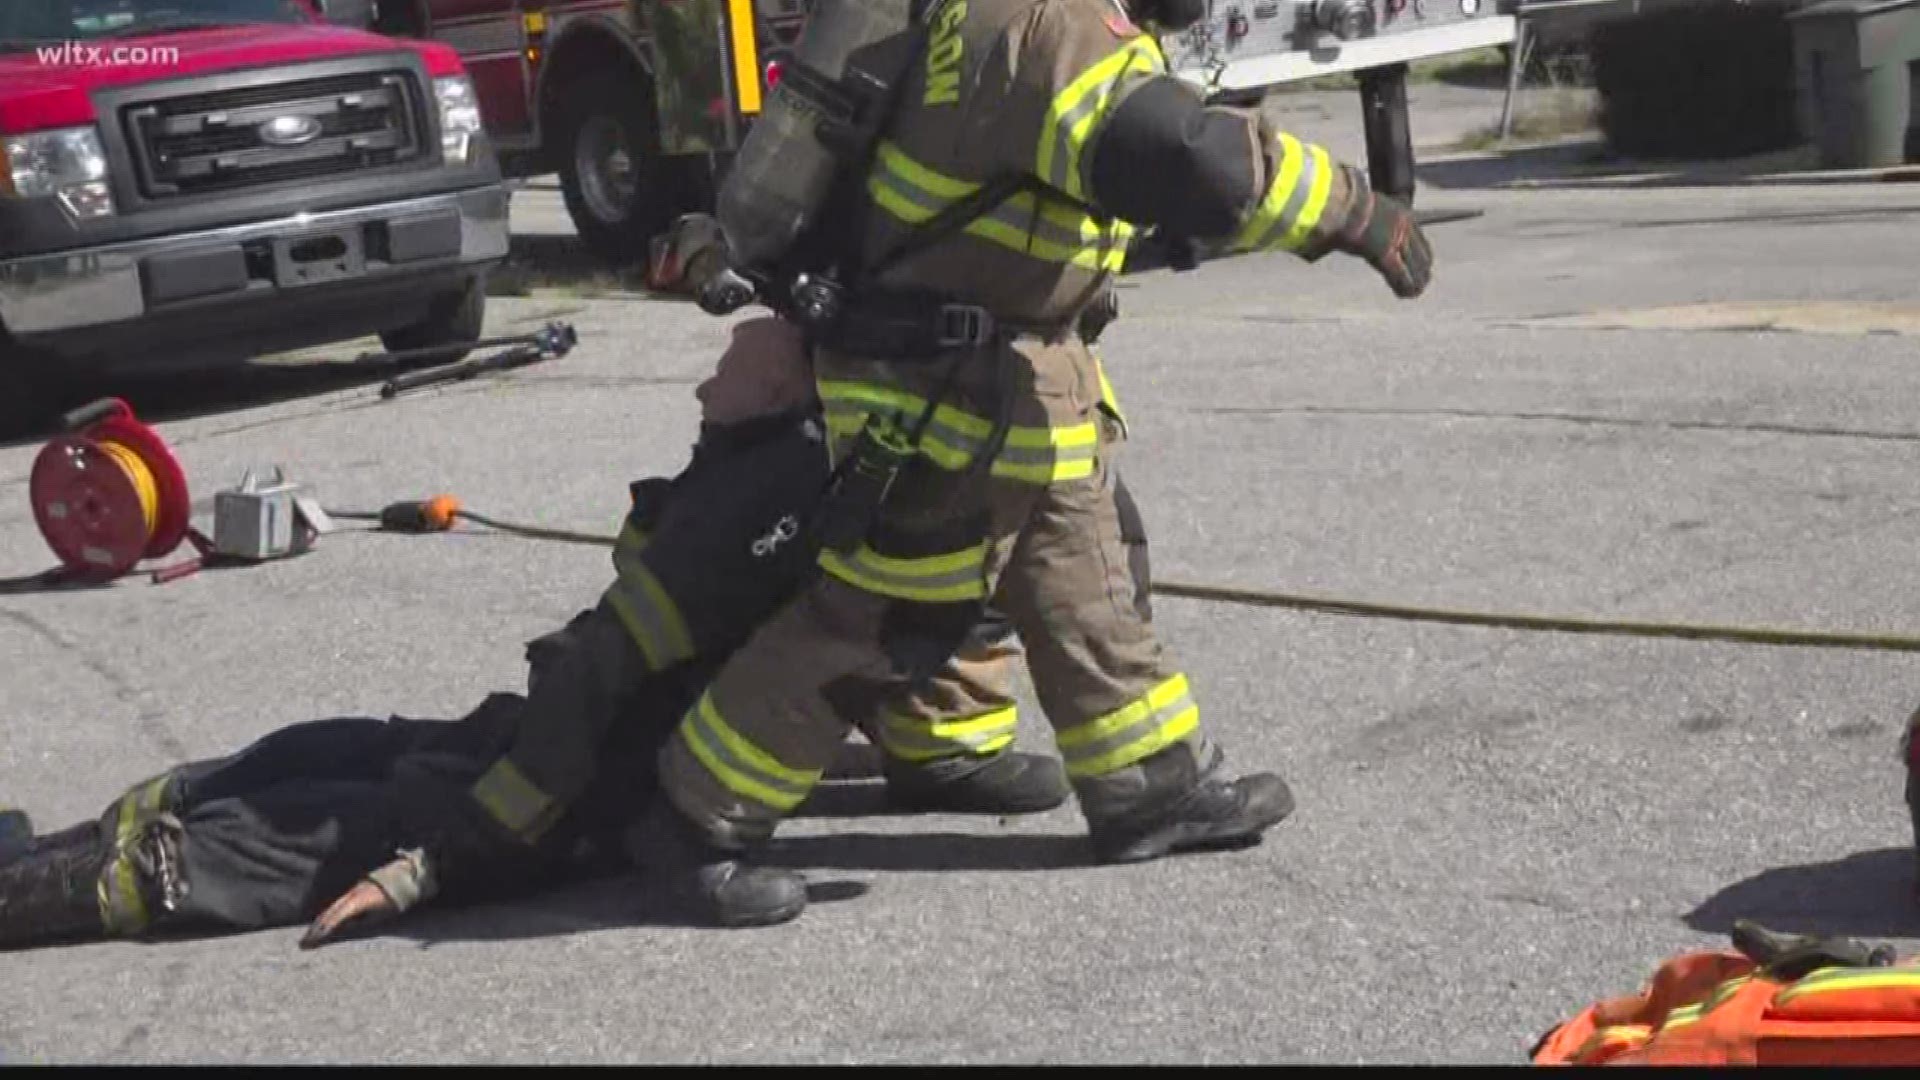 Columbia firefighters got a good simulation of what it's like to deal with a fully engulfed fire.